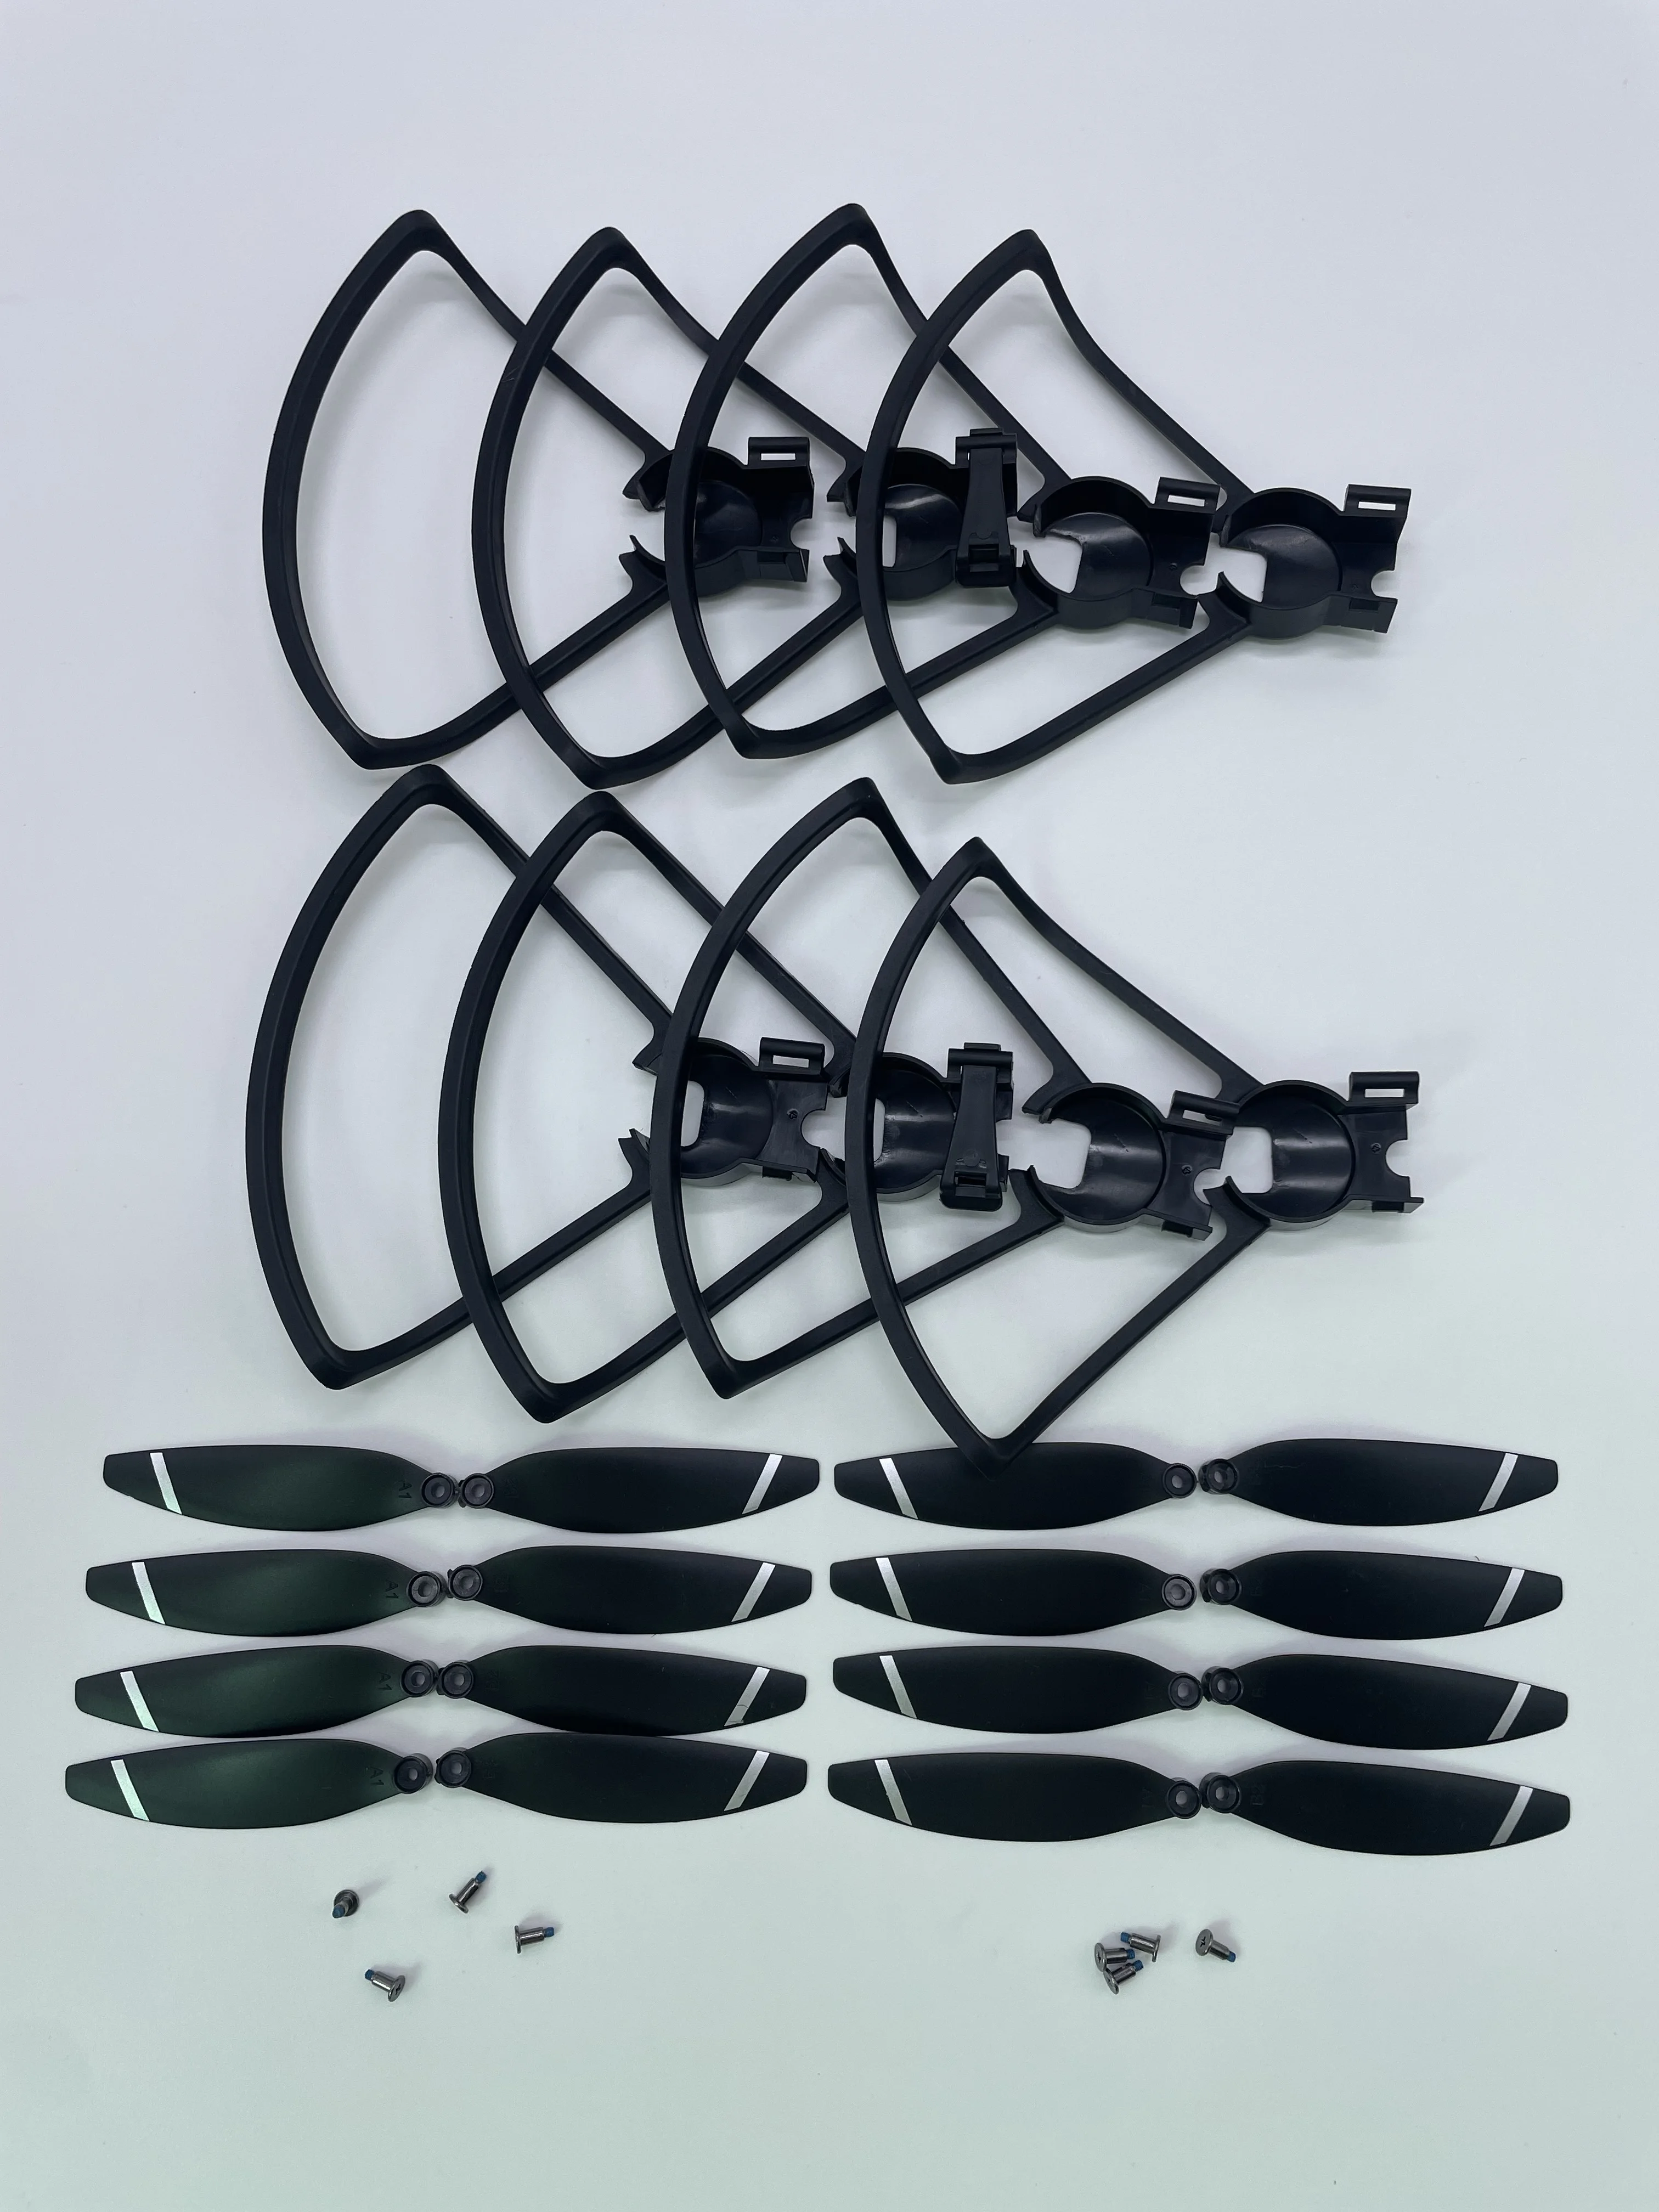 Rc l900 pro se max gps toy rc drone quadcopter parts propeller protect blades guard kit thumb200